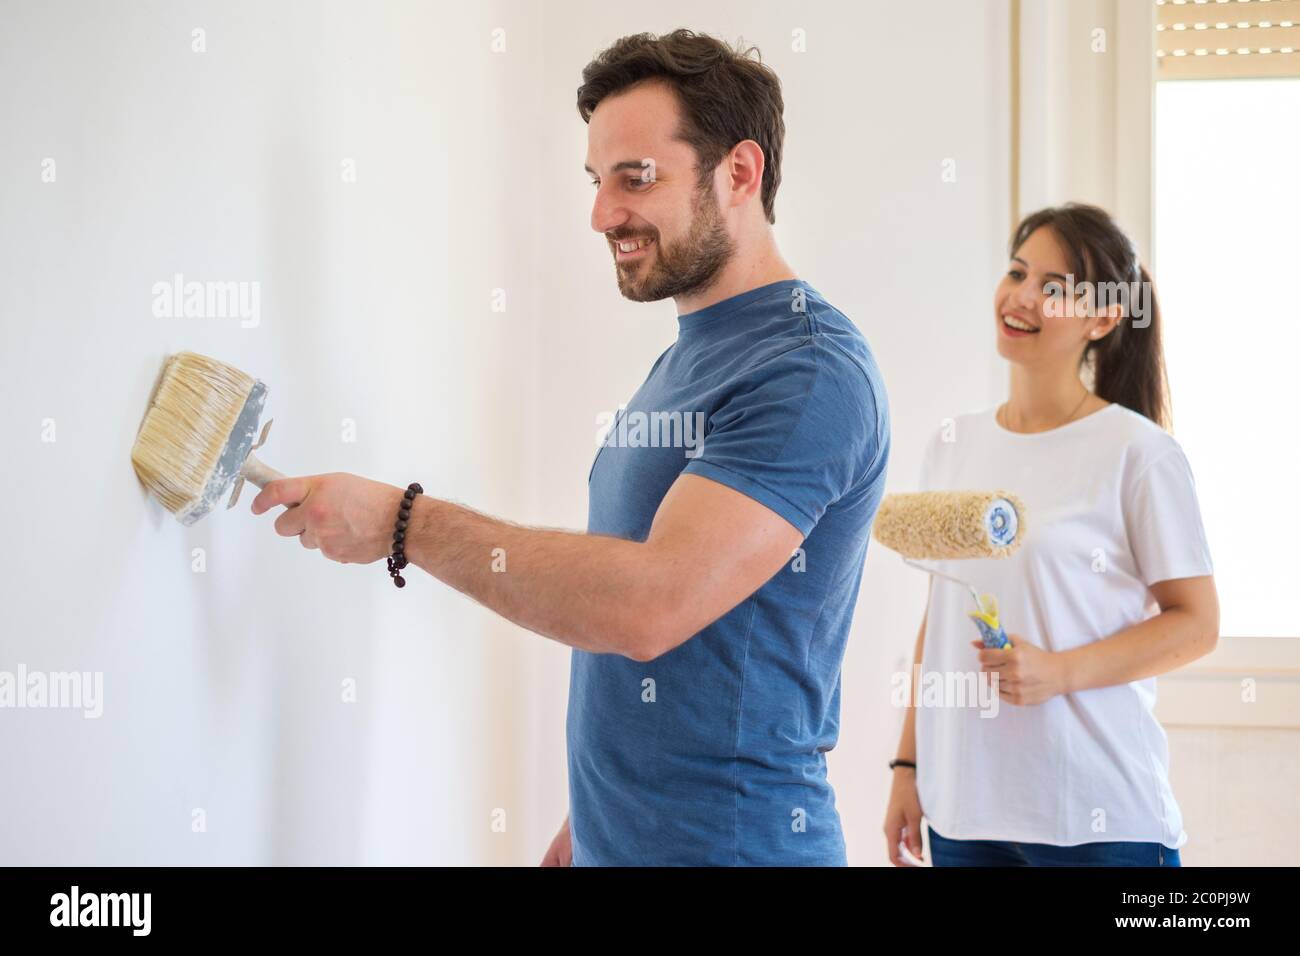 Couple in love and home renewal improvement concept Stock Photo